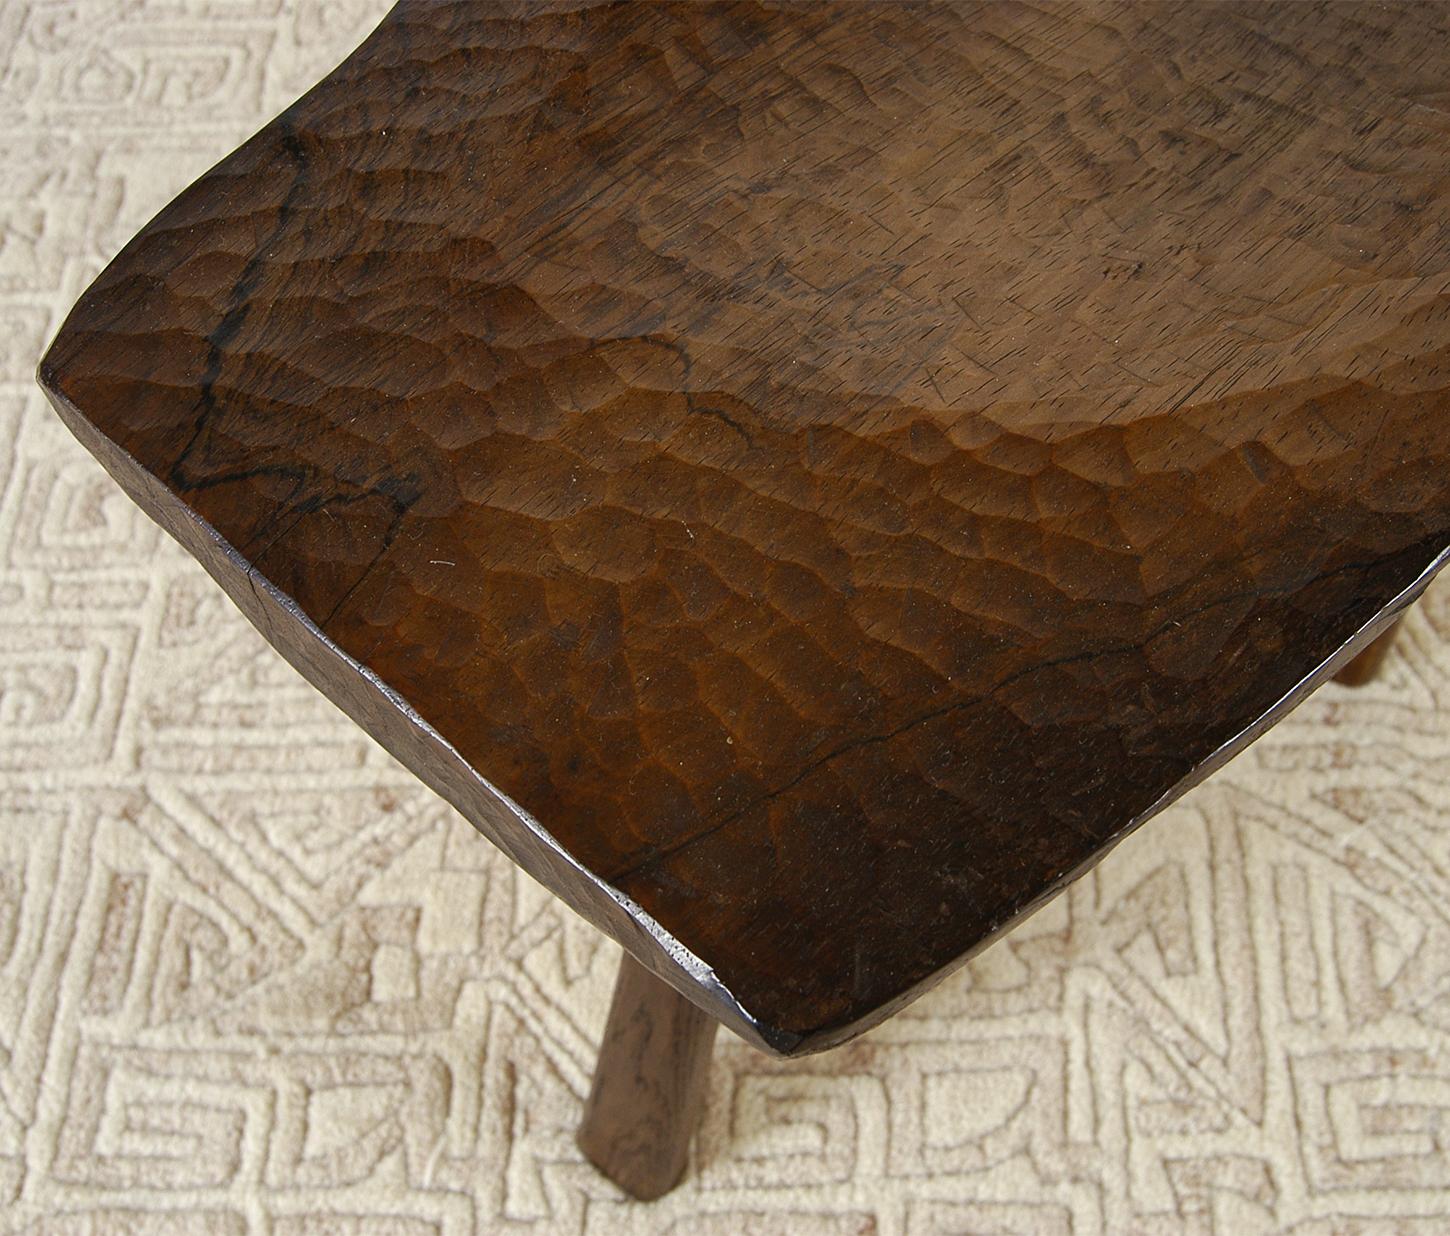 19c Folk Art Country Swedish Adze Carved Rosewood Tripod Table Bowl Decorative For Sale 5